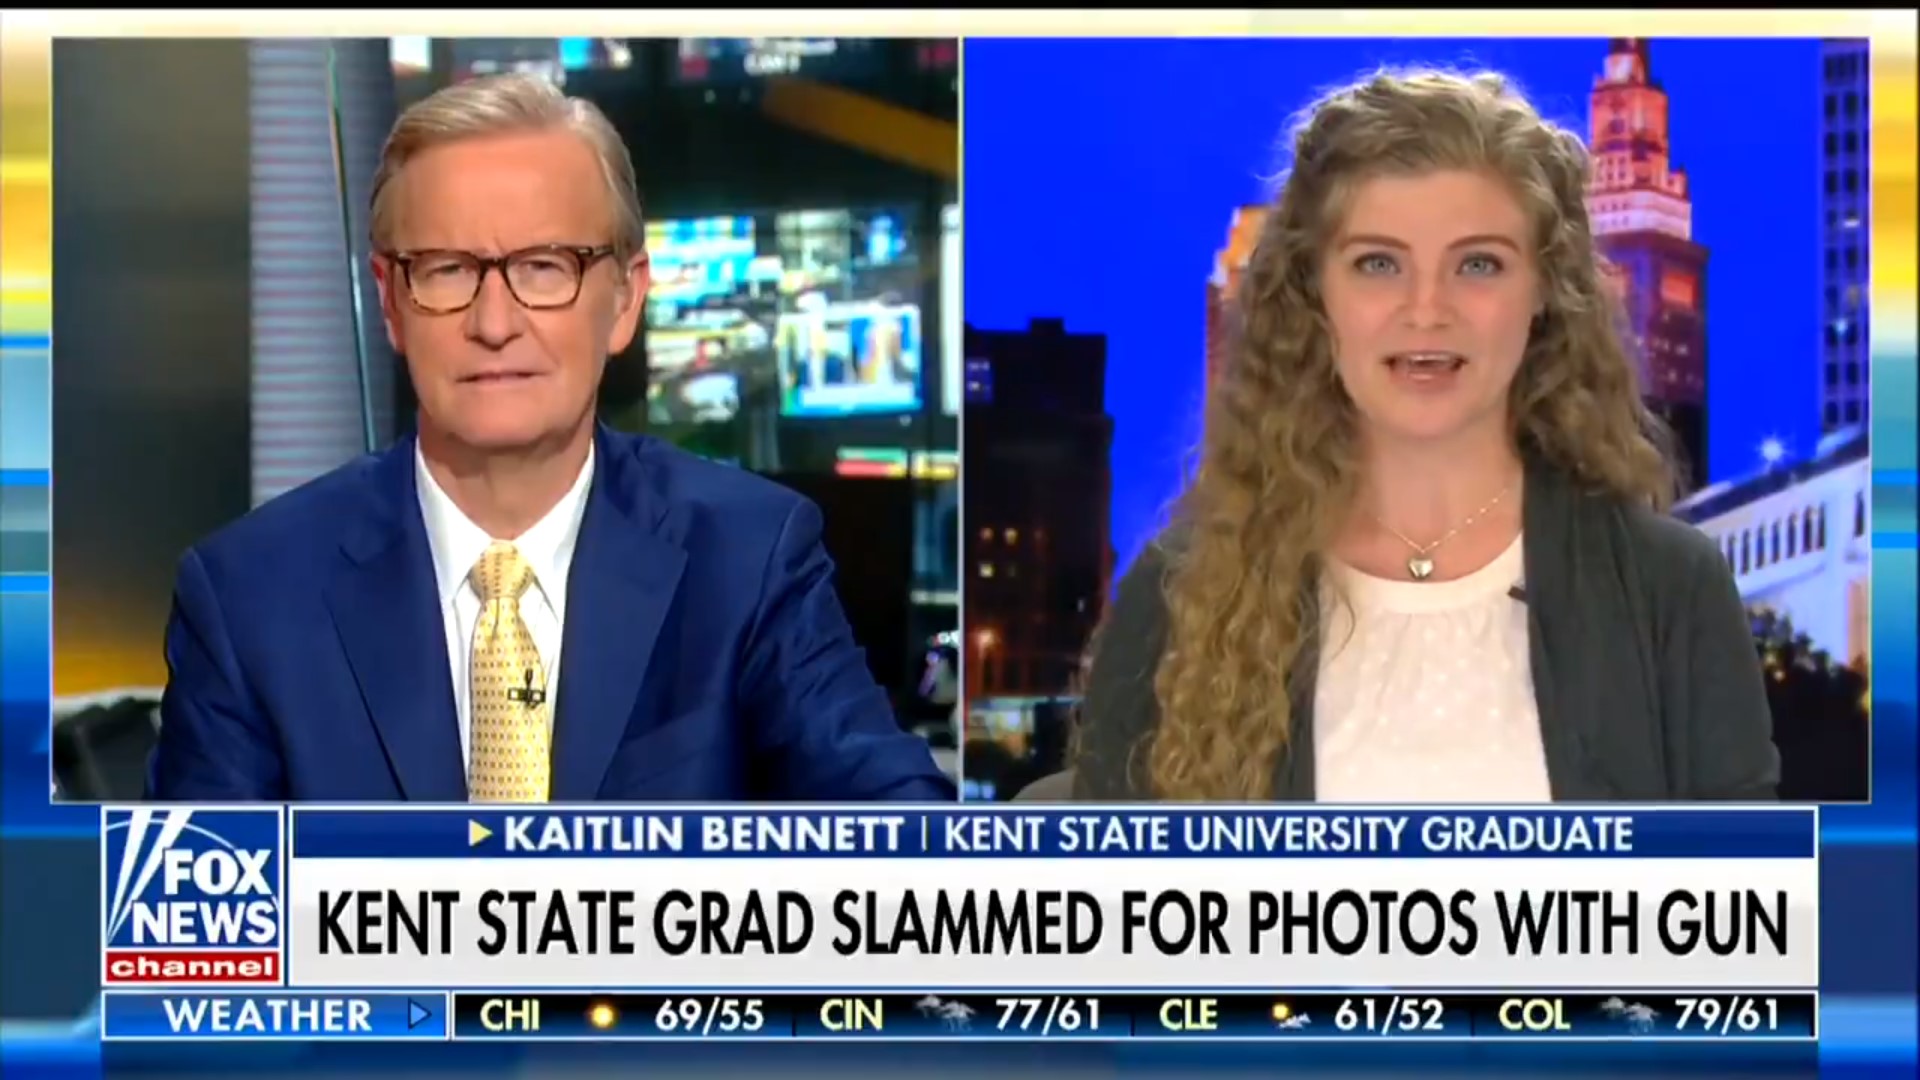 TPUSA Diaper Protest Organizer Says She’s Victim Of ‘Blatant Racism’ Over Campus Gun Stunt